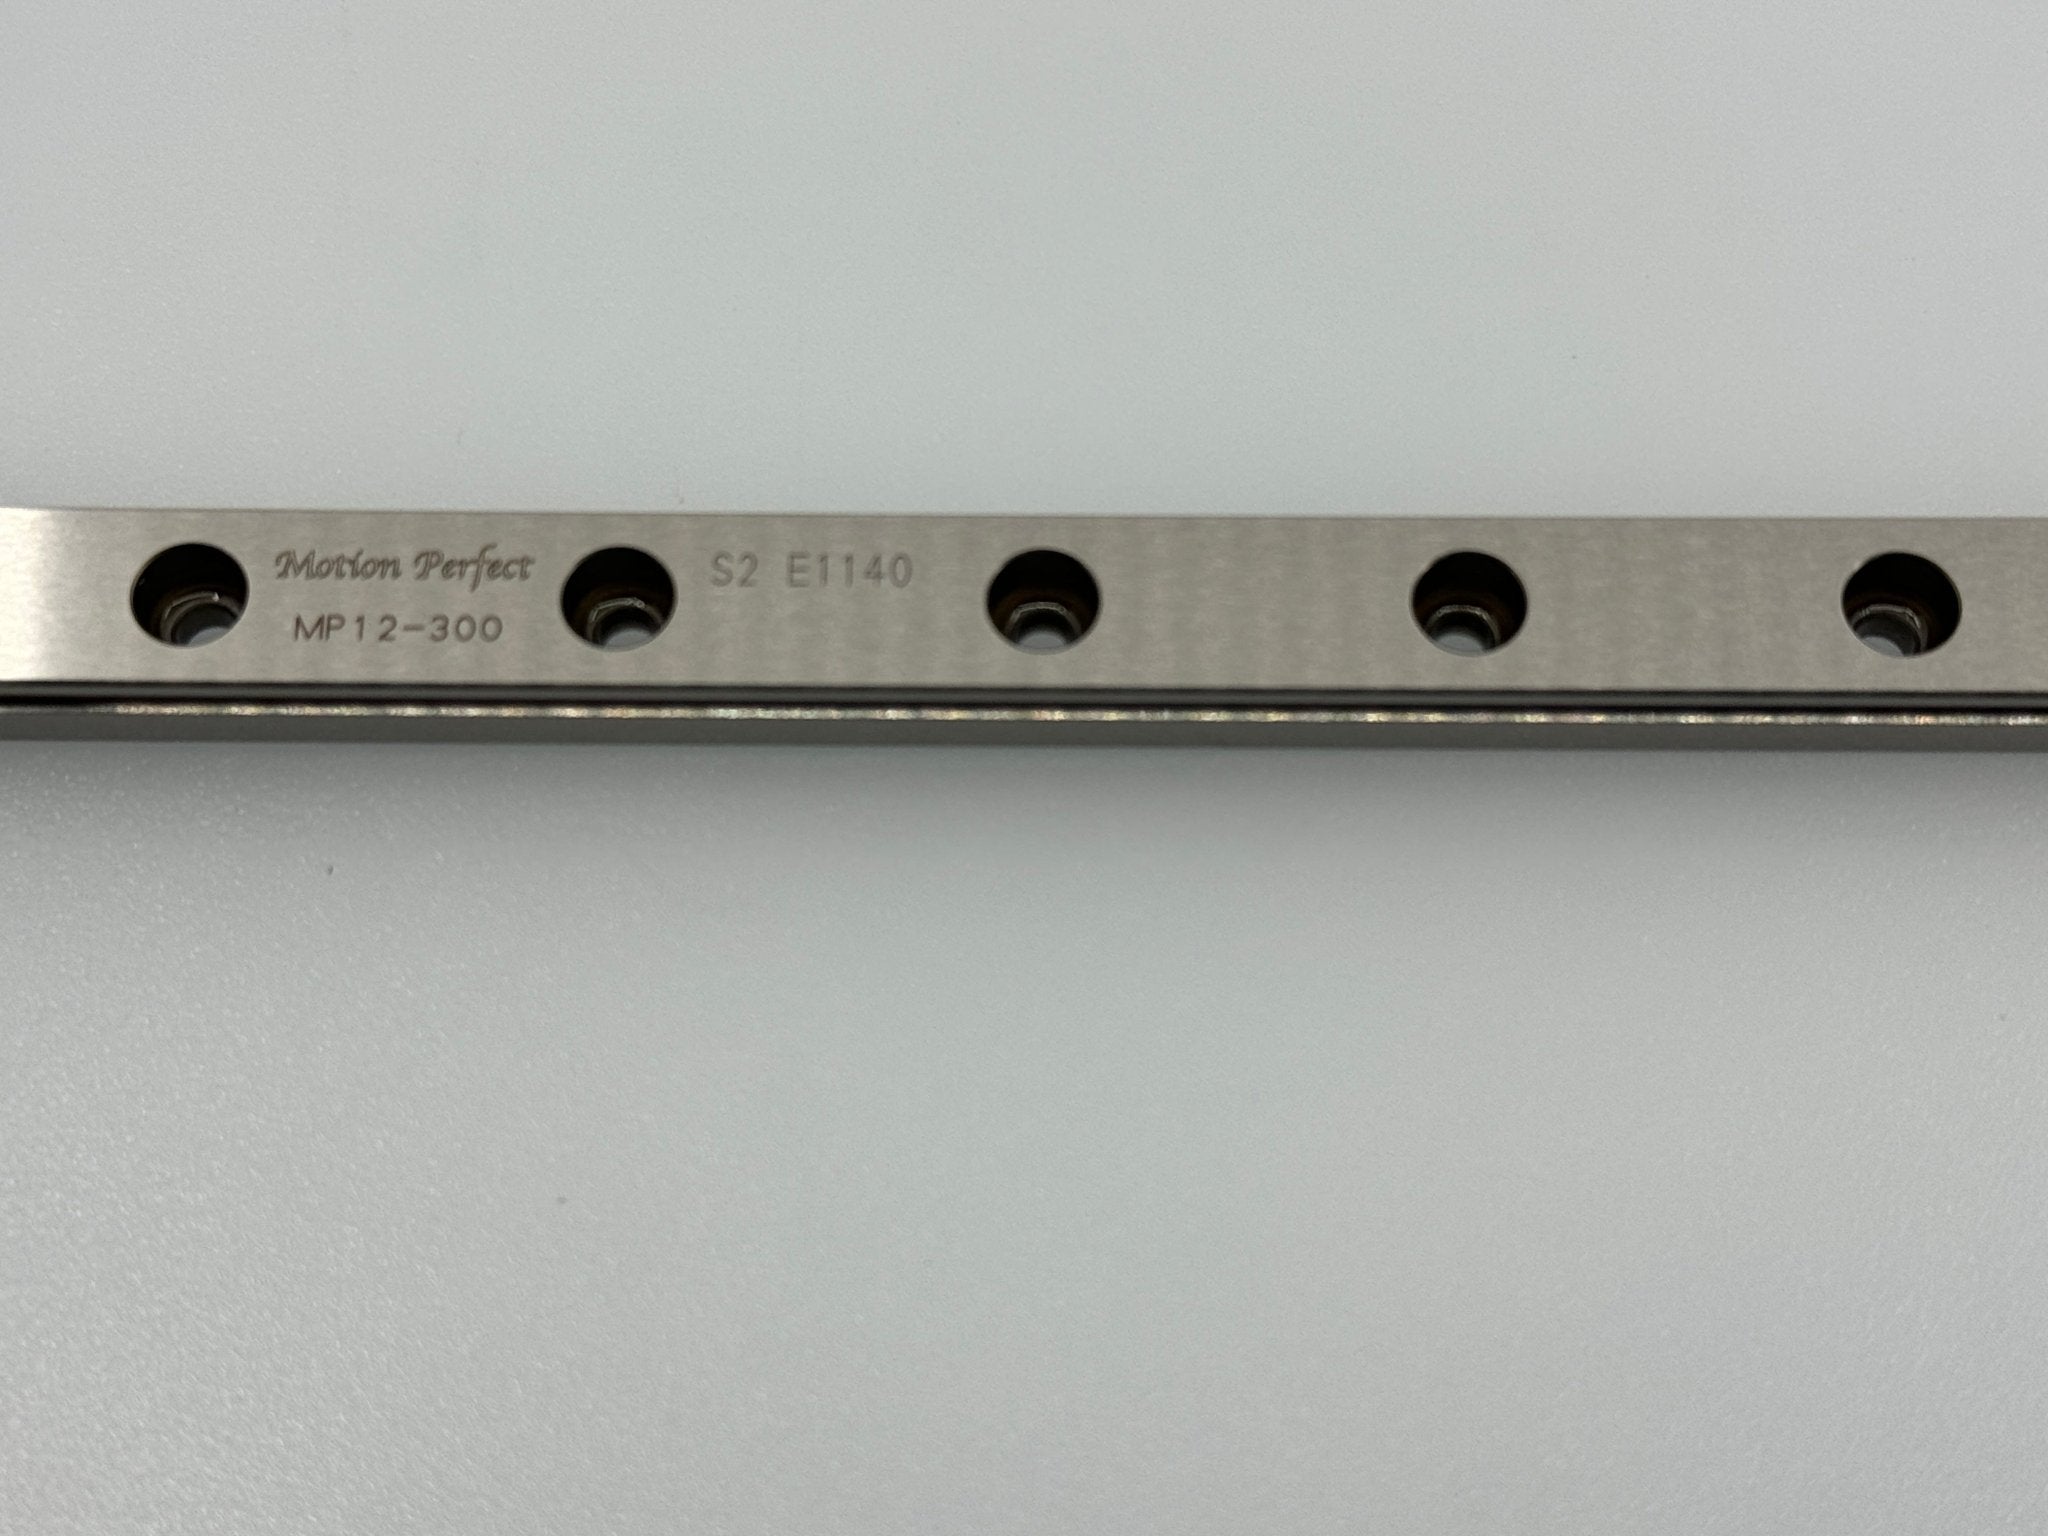 Motion Perfect Linear Rail - West3D 3D Printing Supplies - Motion Perfect